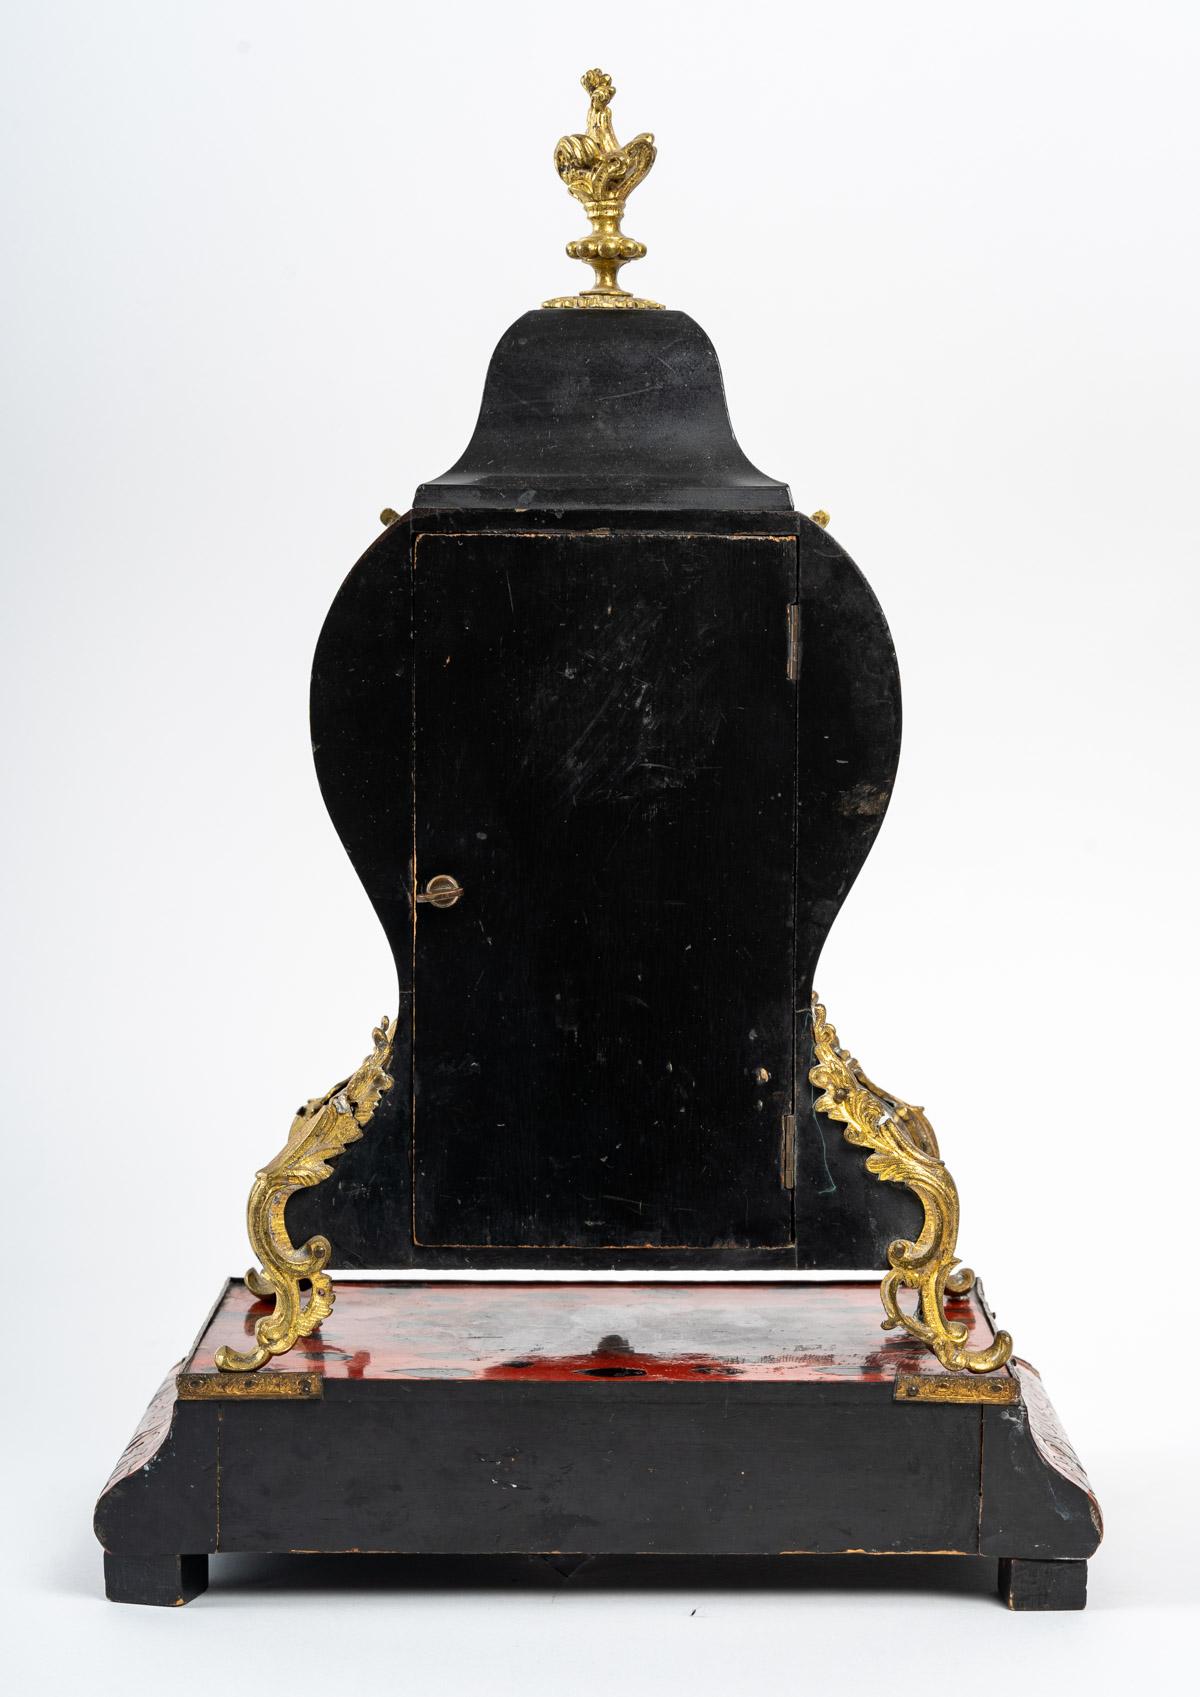 Cartel with its Base in the style of Boulle, brass inlays and imitating tortoise shell, Louis XV style, Napoleon III period, 19th century.
Measures: H: 45 cm, W: 28 cm, D: 17 cm.